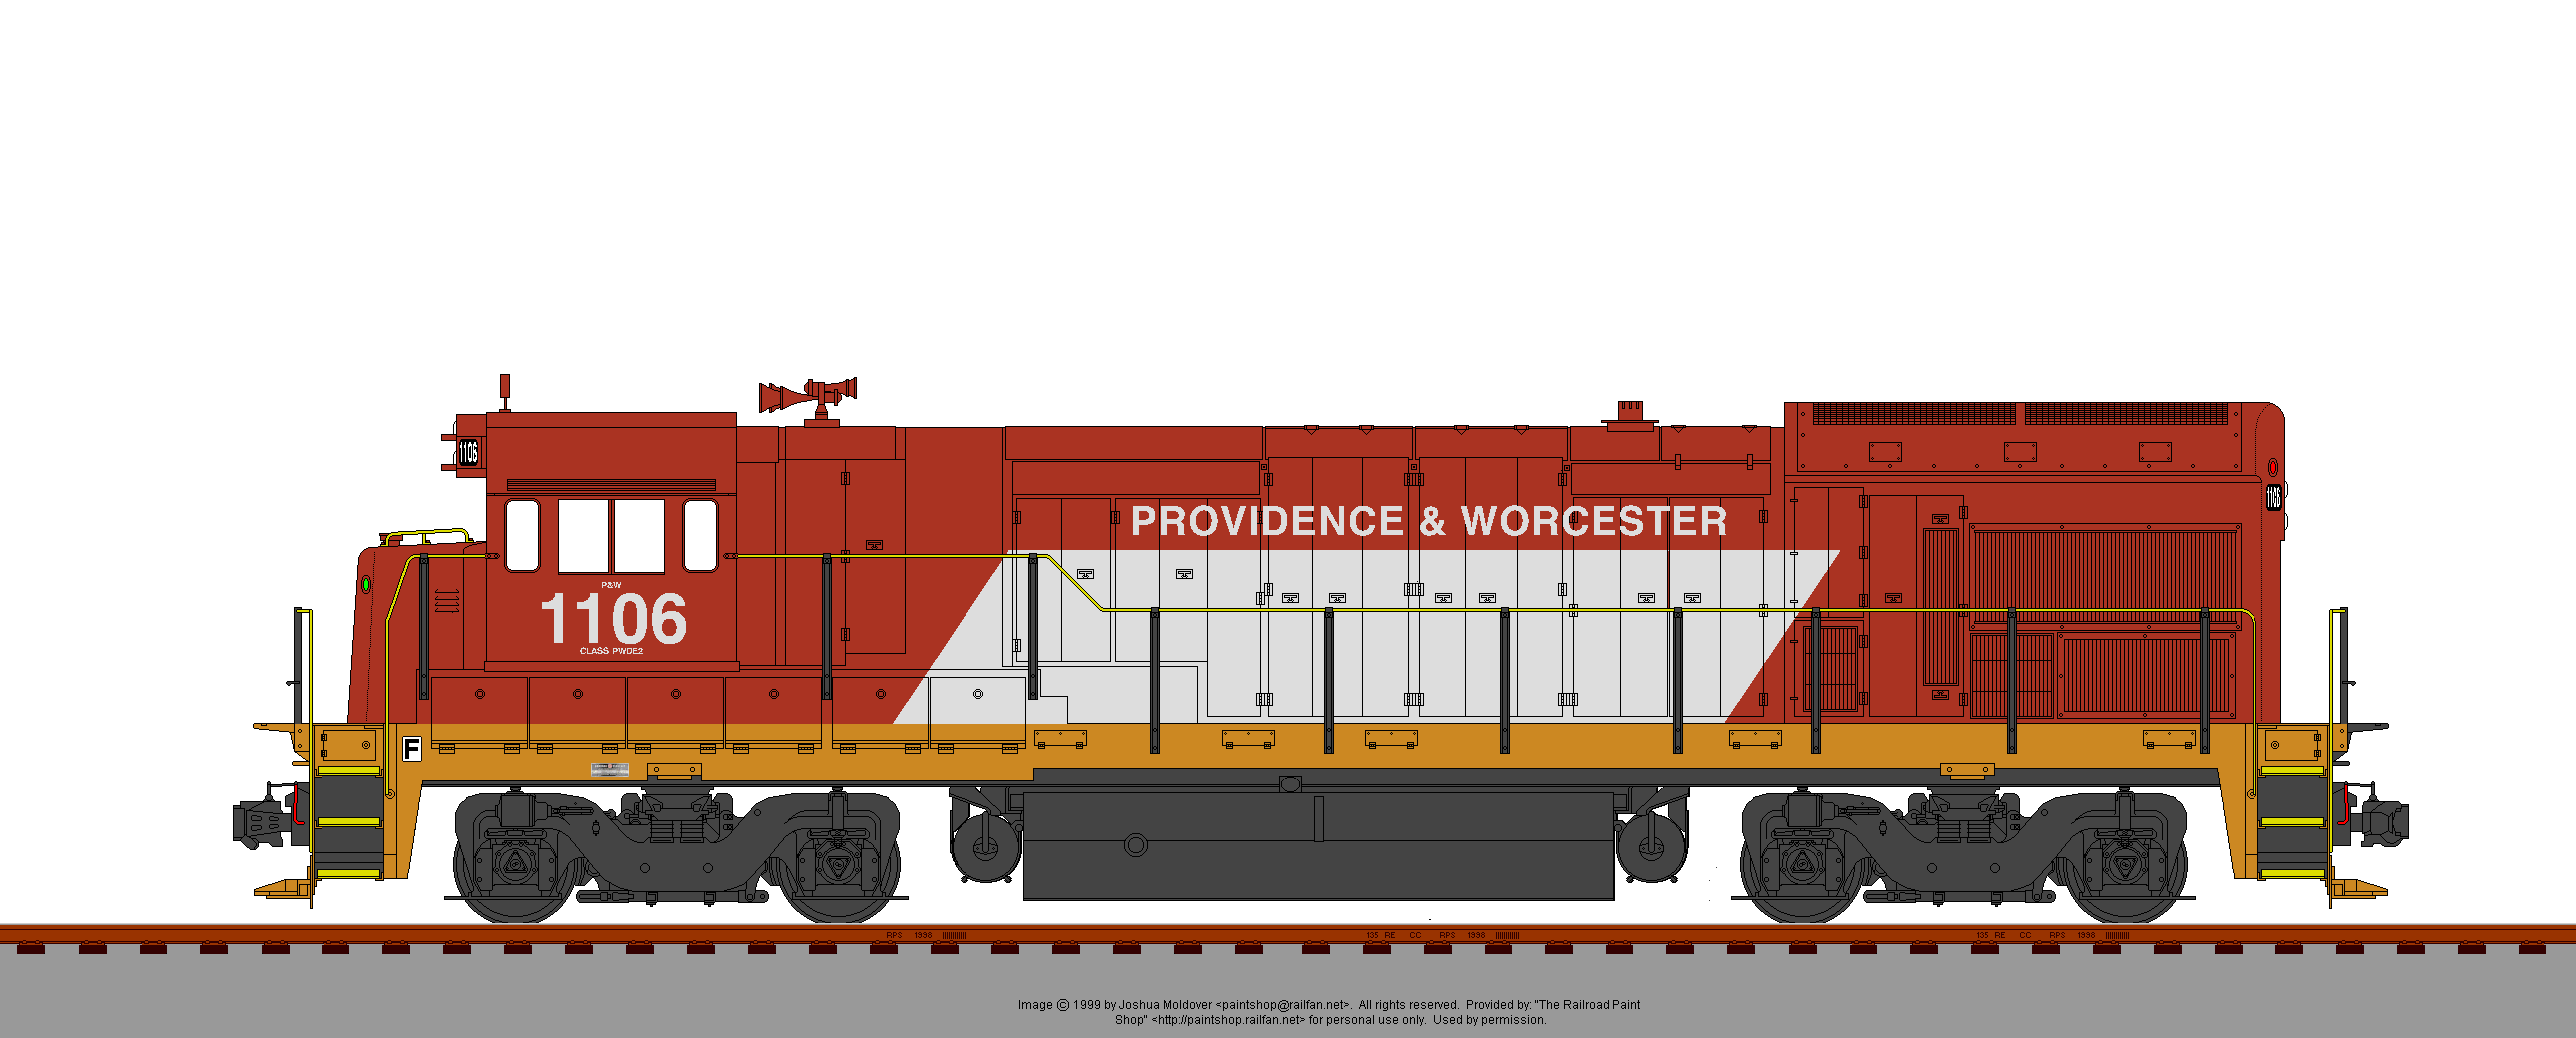 P&W B23-7 #1106 in P&W red & white